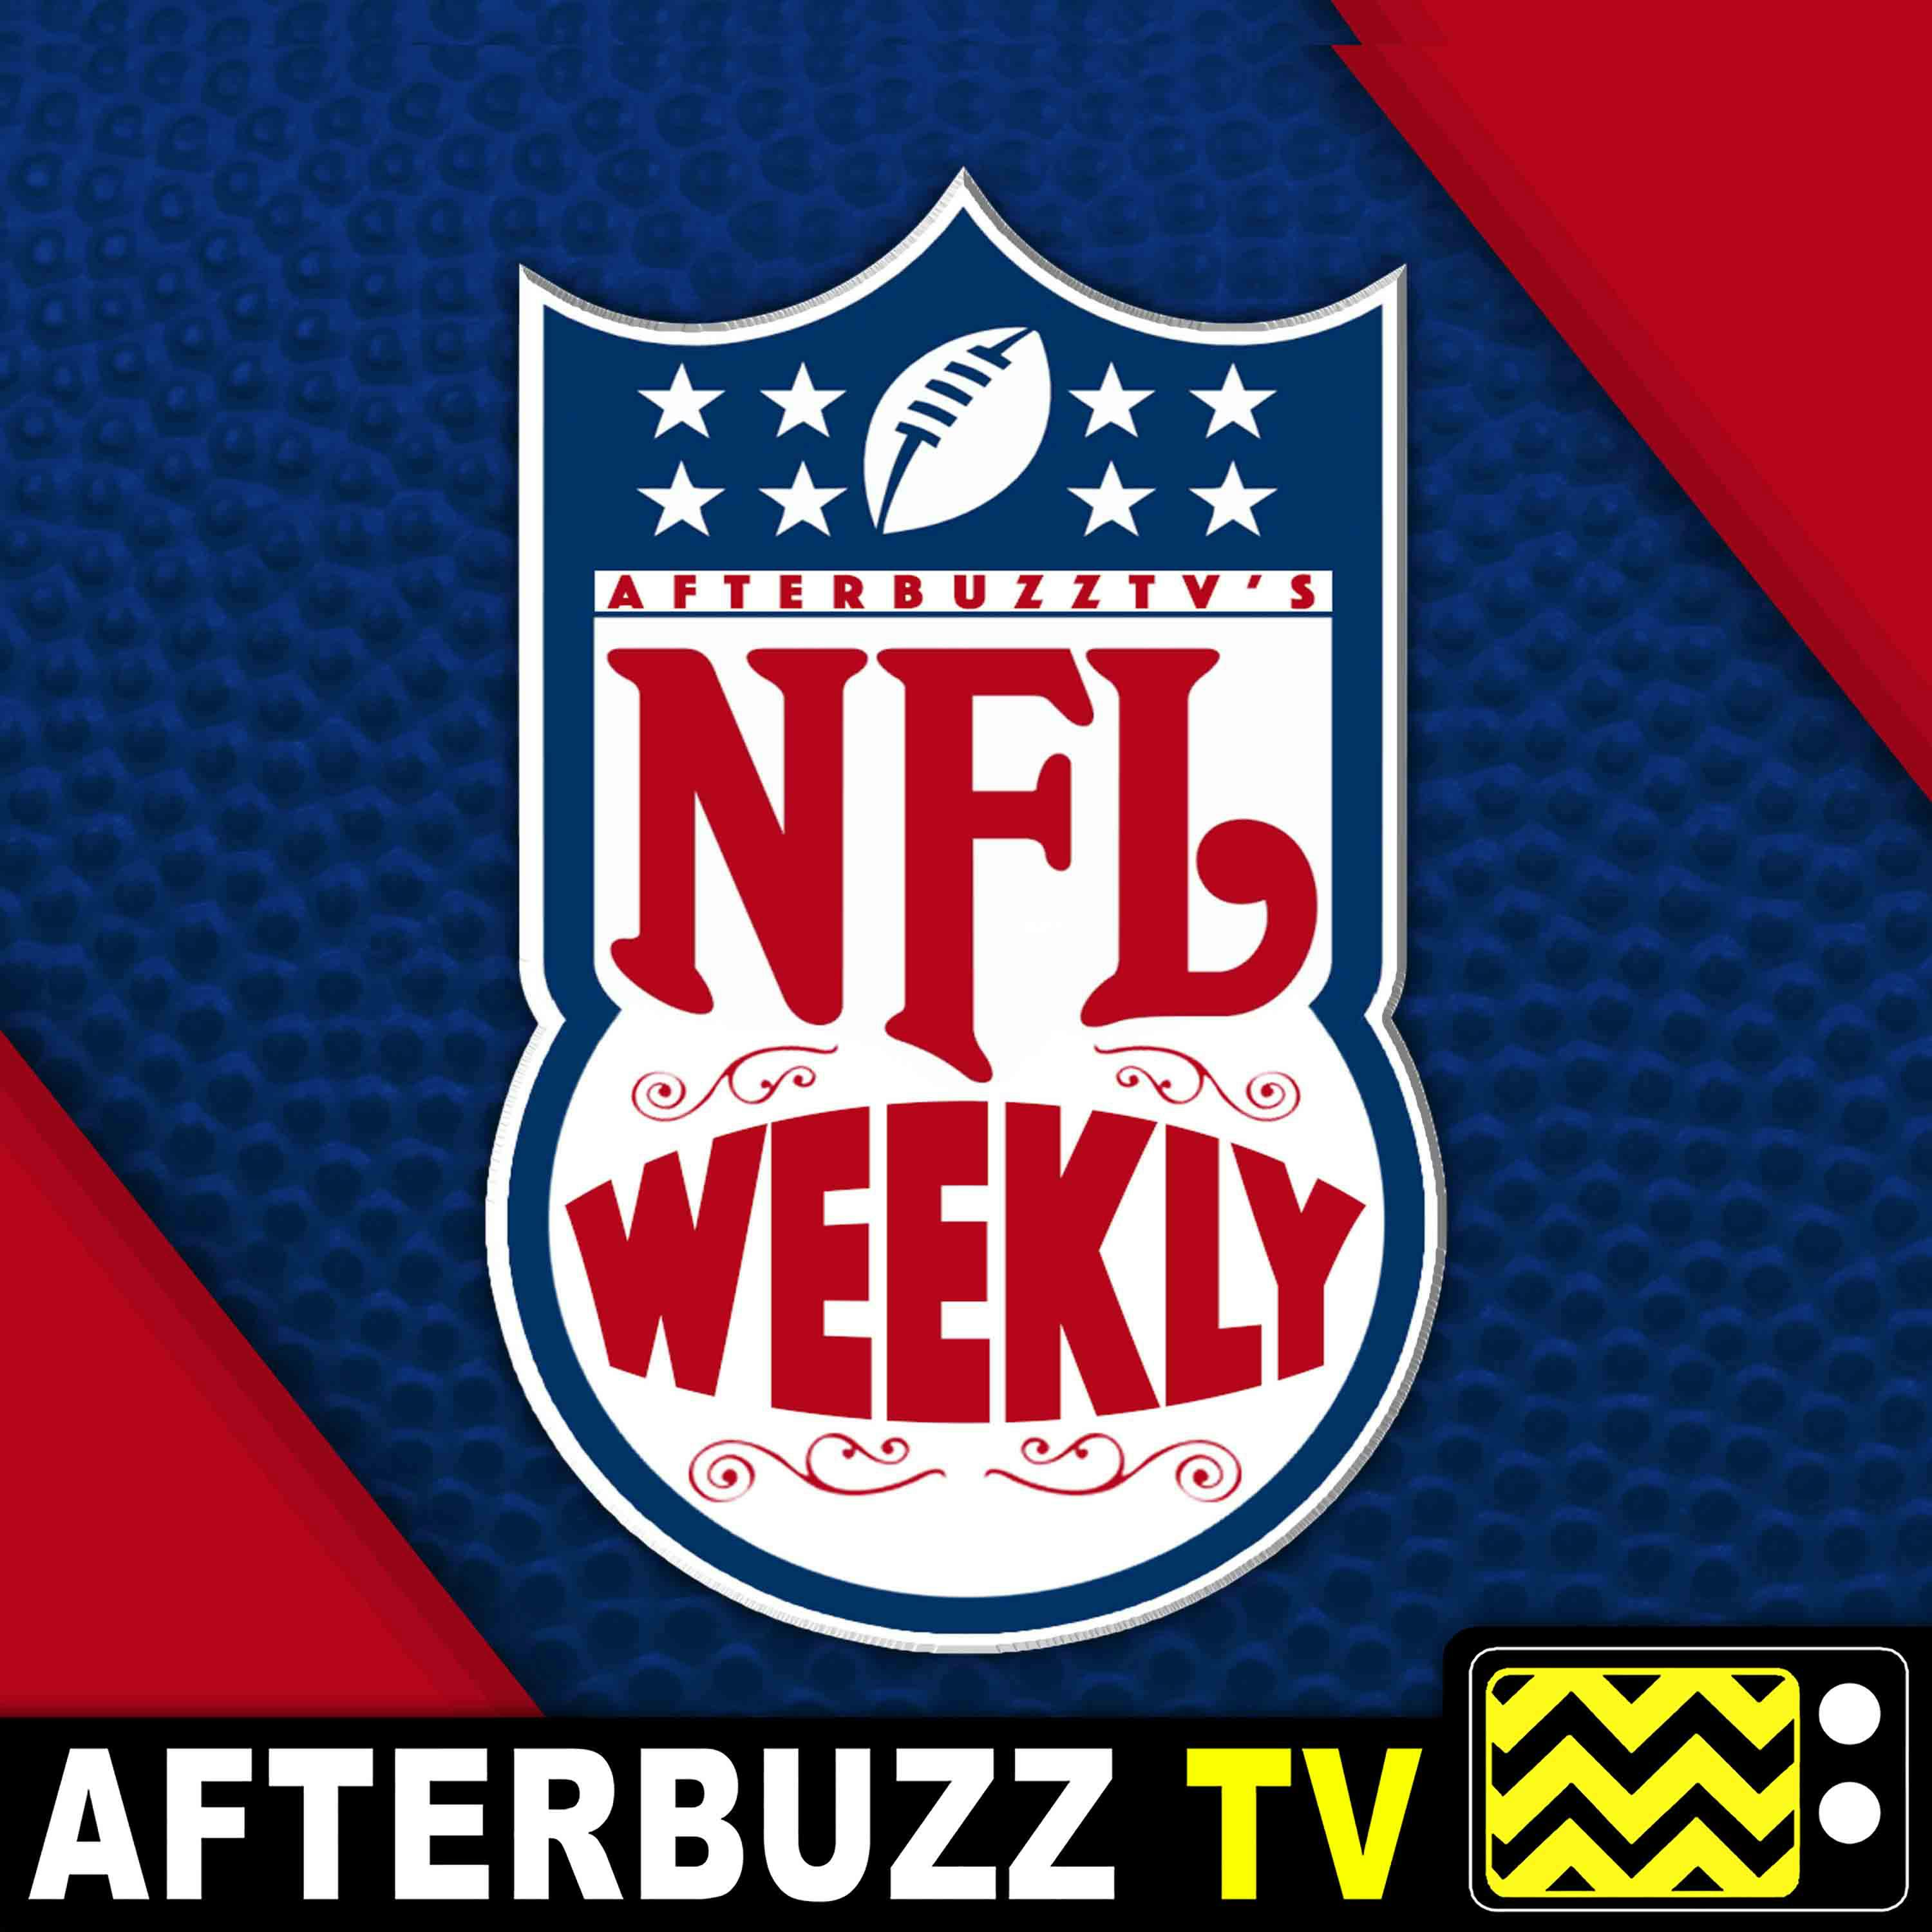 NFL Weekly - AfterBuzz TV